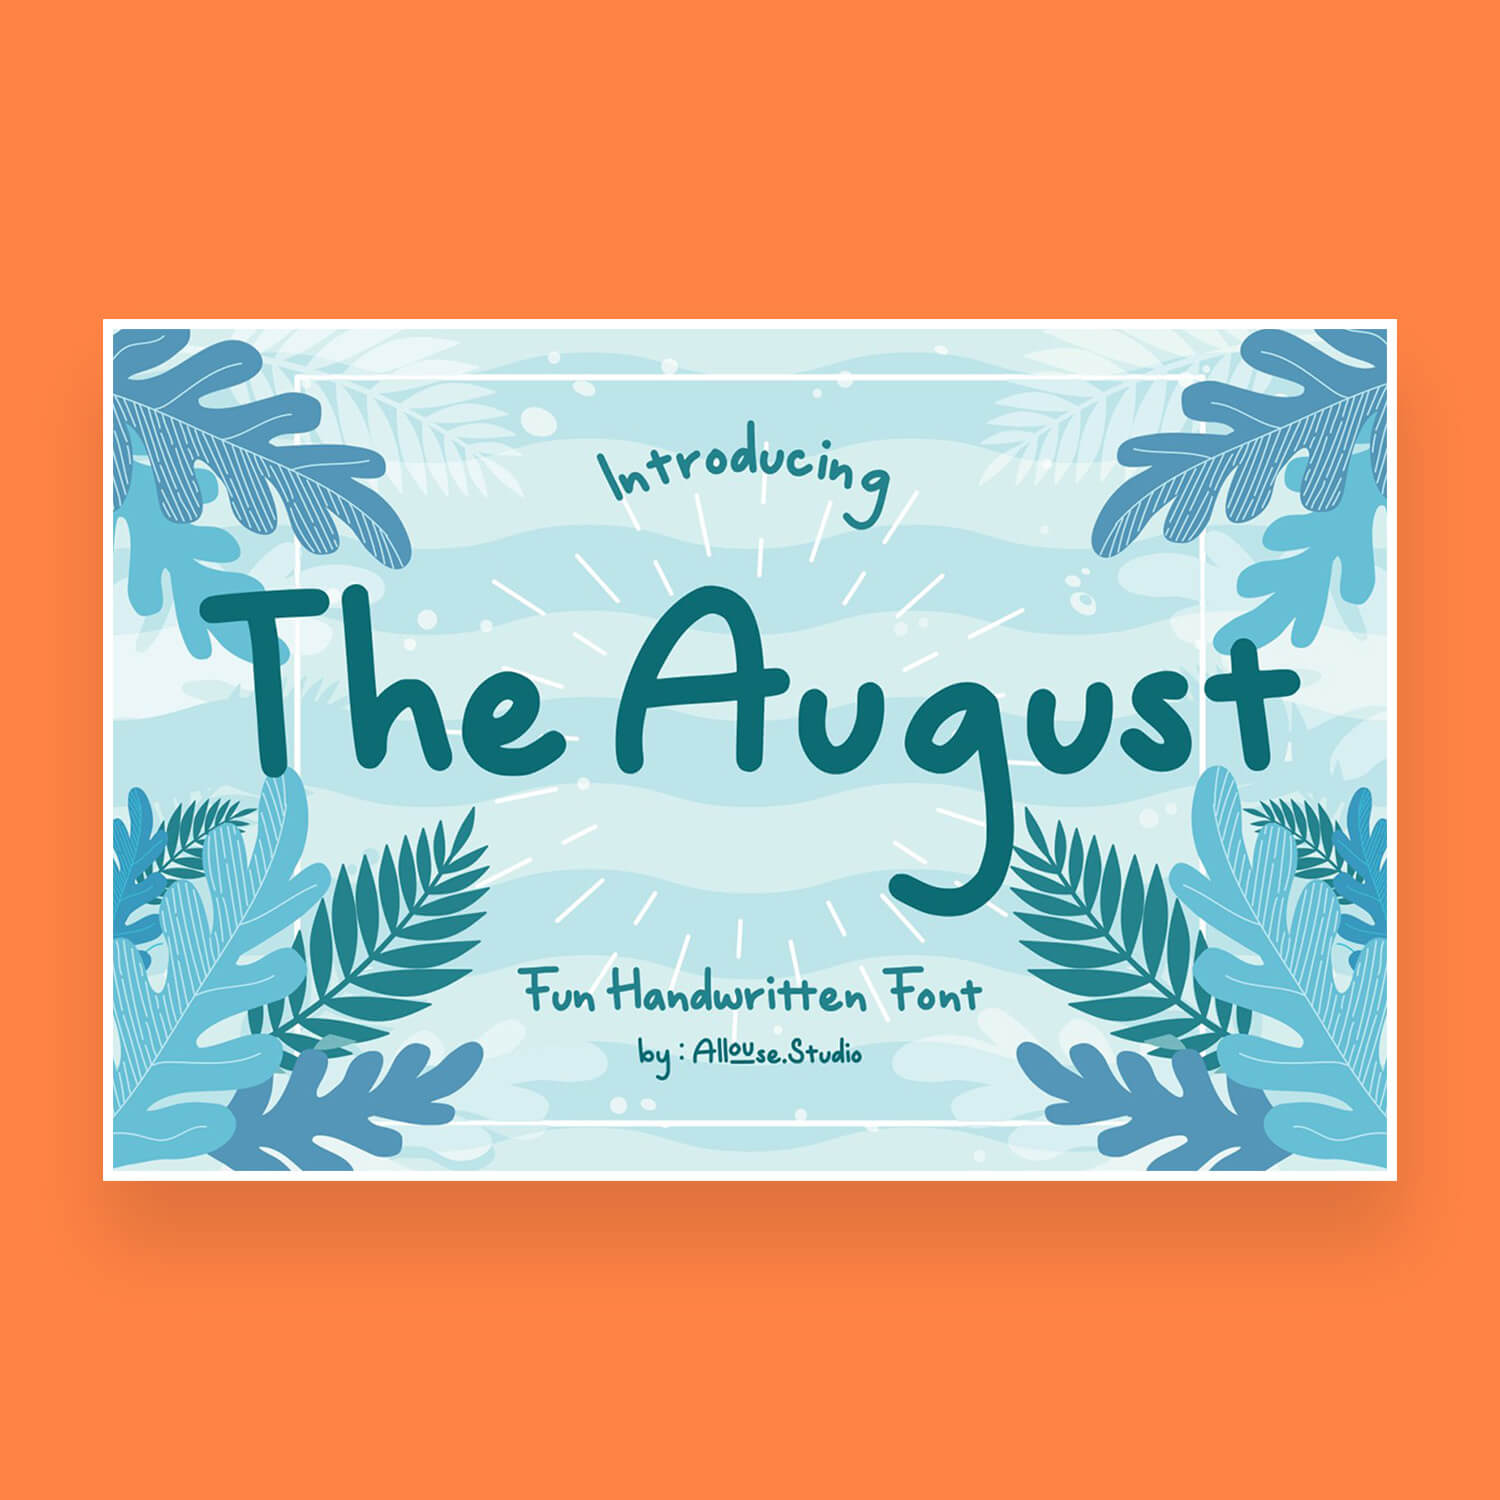 the august fun handwritten font cover image.